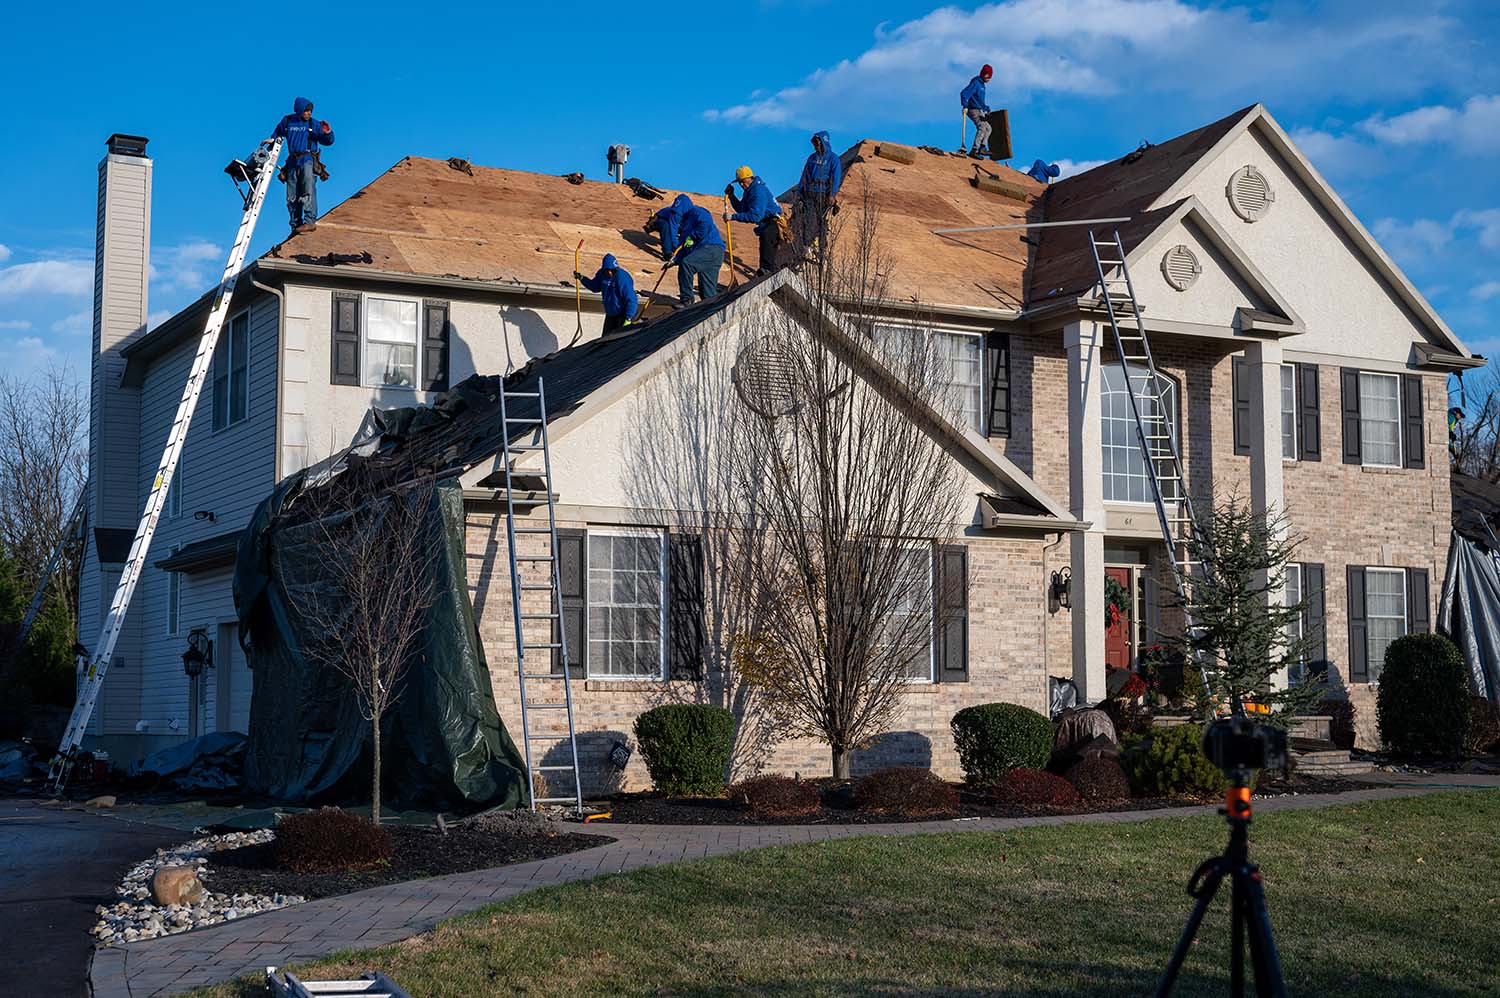 New Hope Roofing repair company - residential roofing contractors in New Hope, PA (medium image)